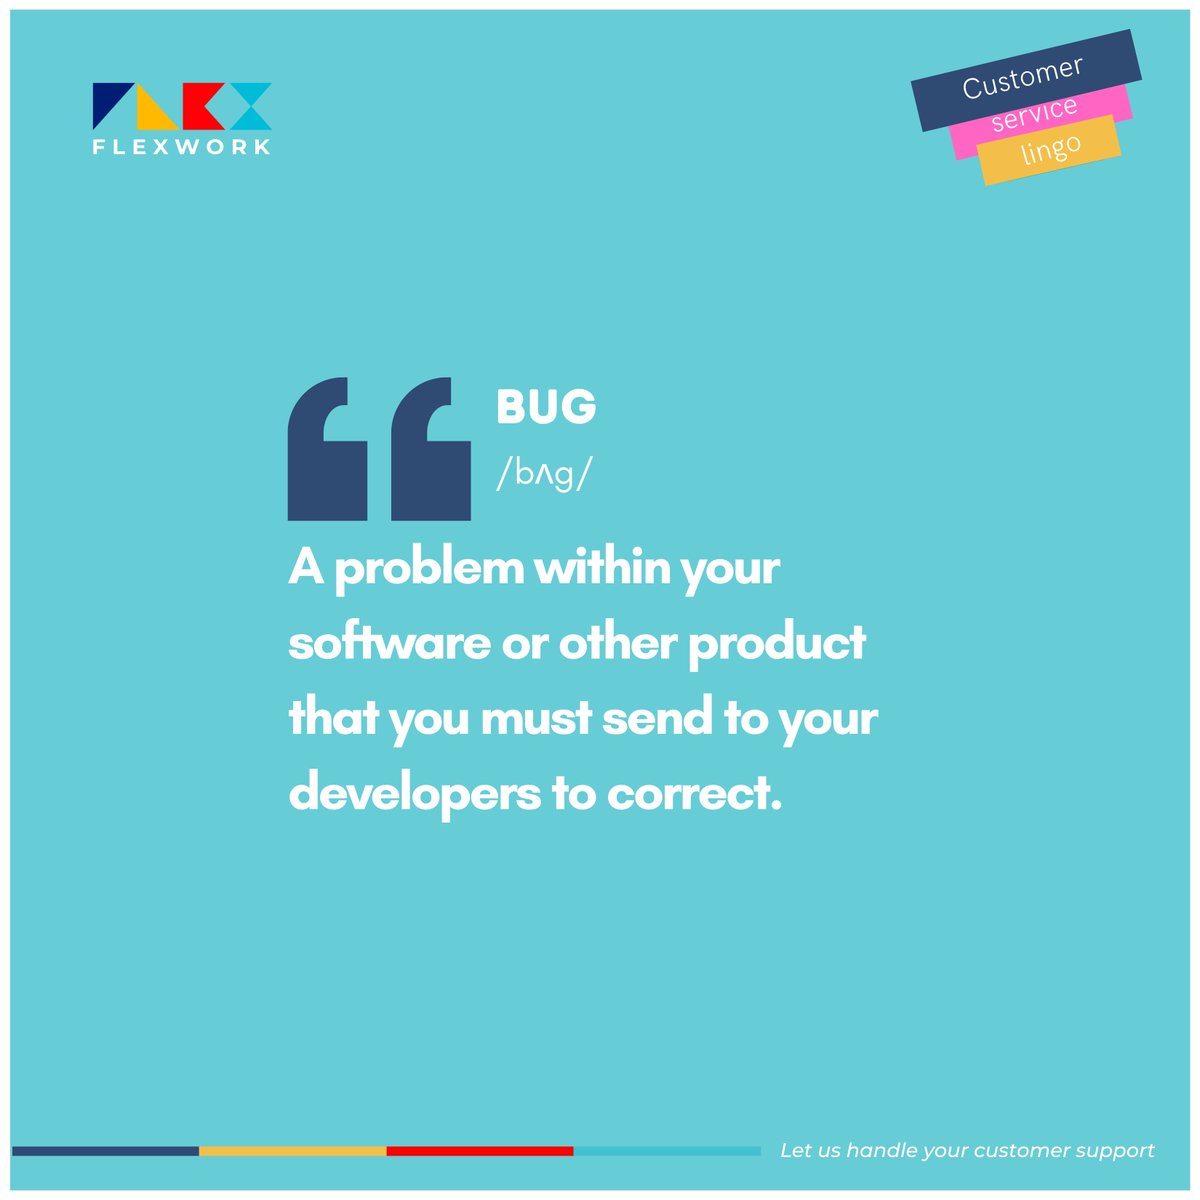 Bugs are problematic and must with dealt with on time to ensure smooth operation. #CustomerSupport #CustomerService #Bugs #Flexwork